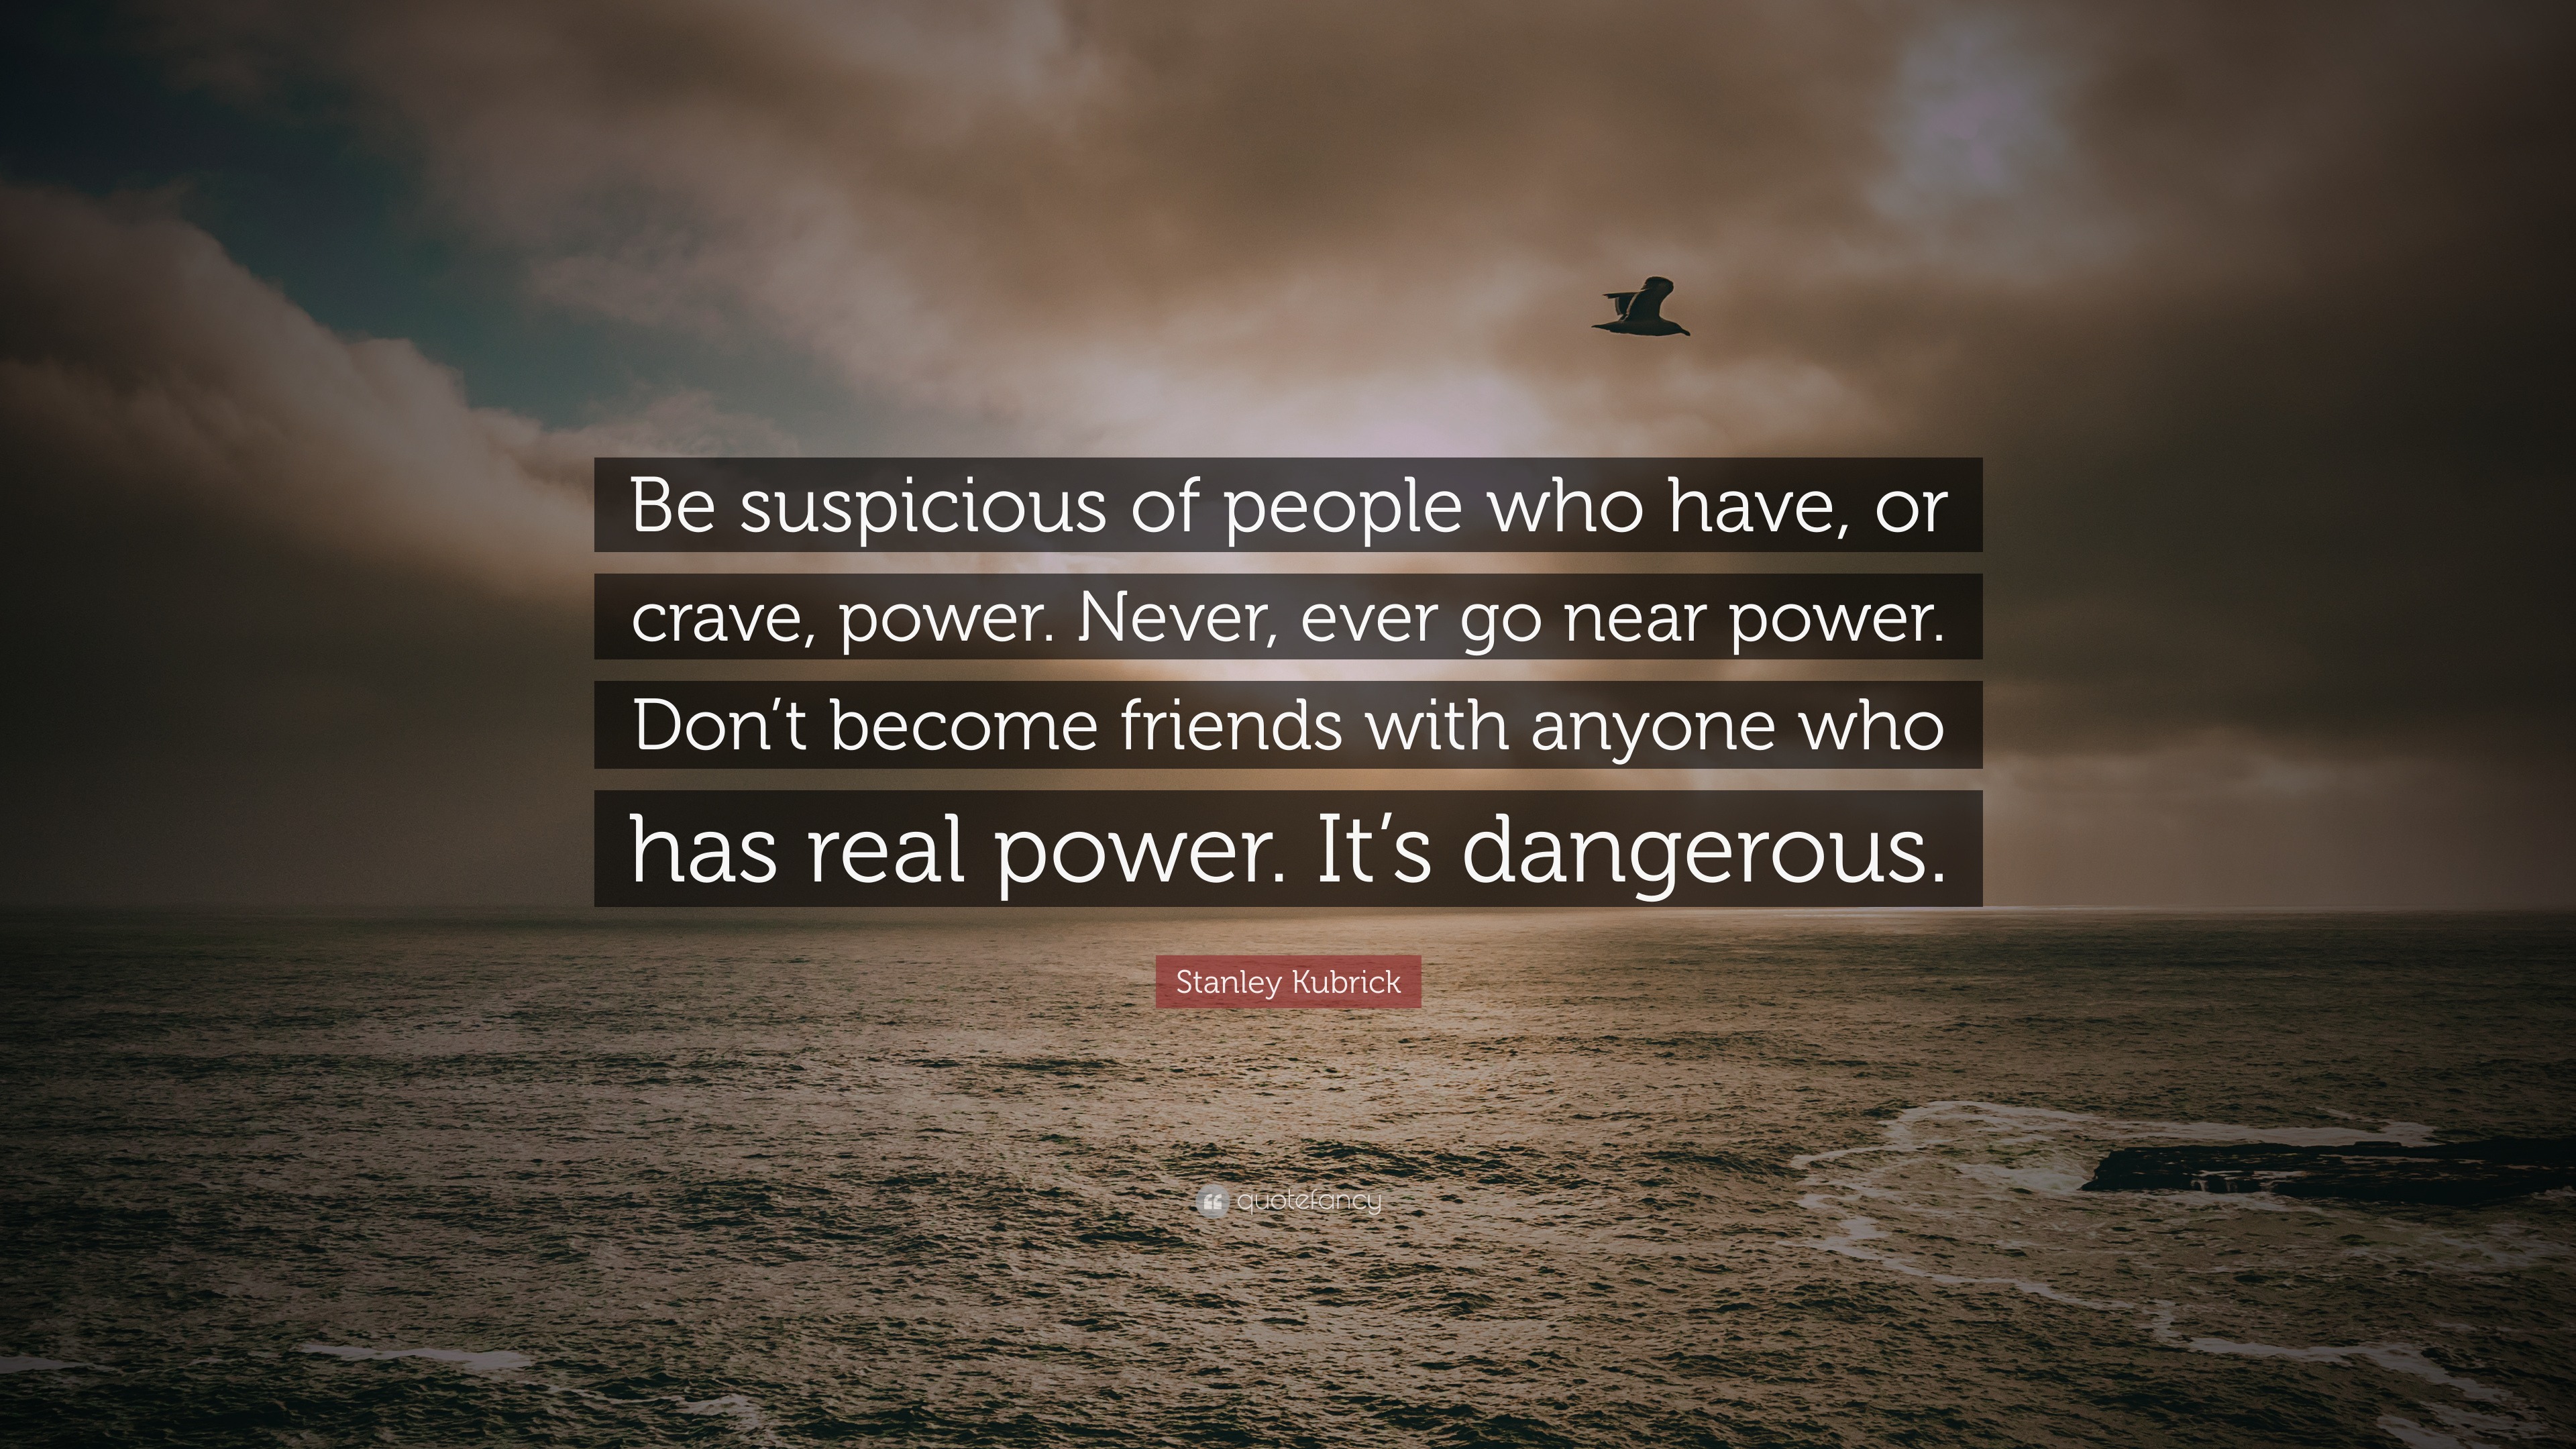 Be suspicious of people who have, or crave, power. 